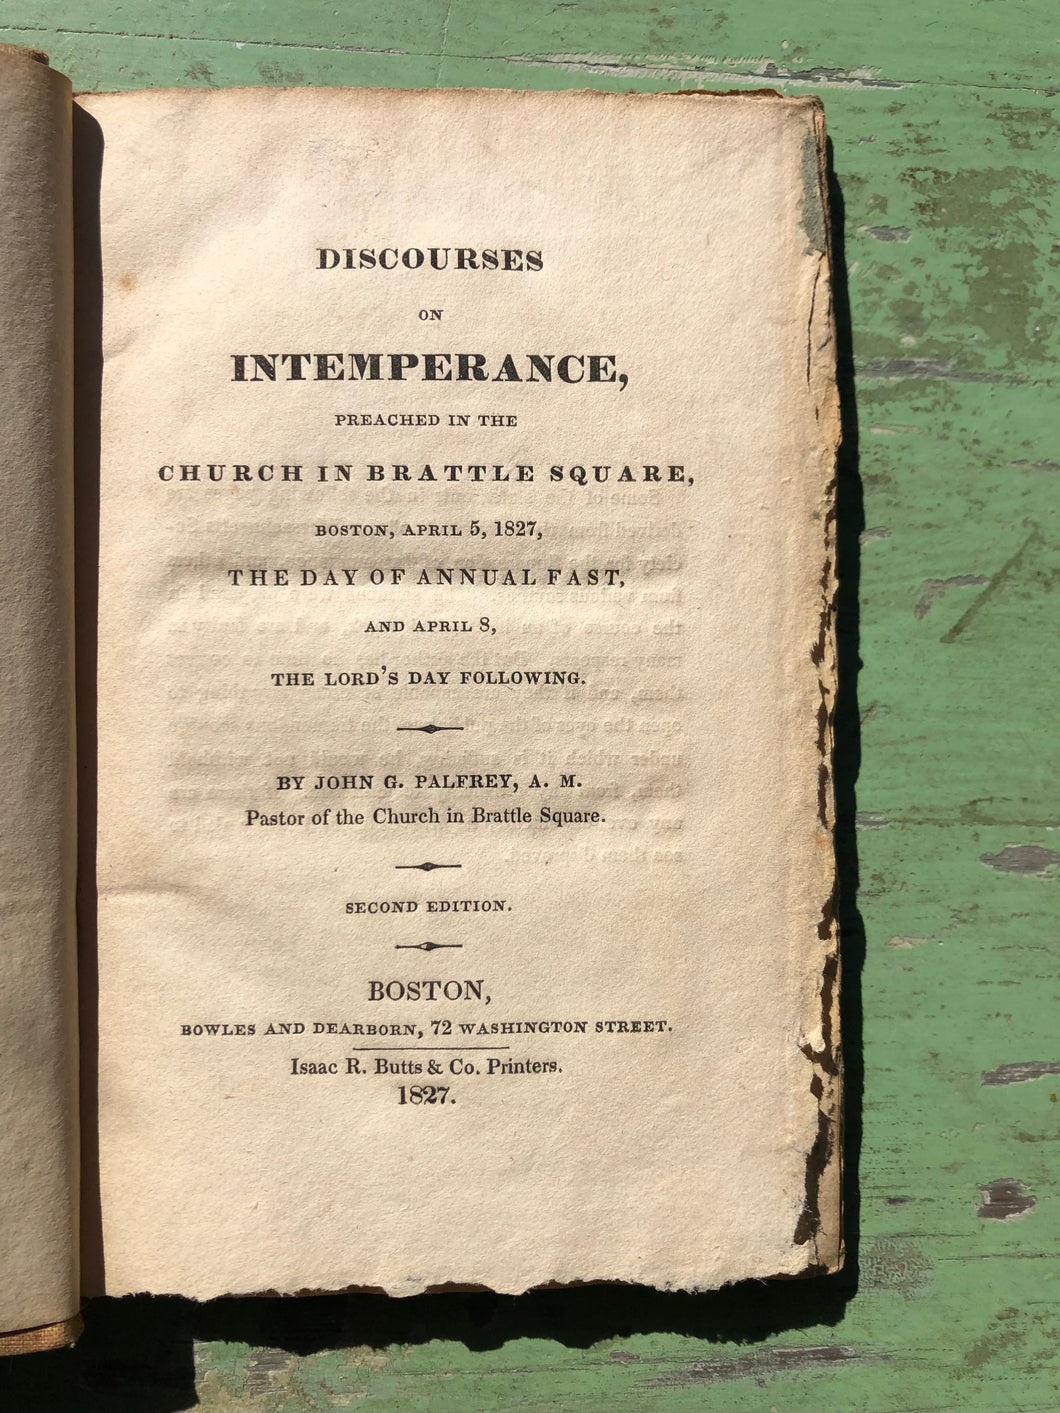 Discourses on Intemperance Preached in the Church in Brattle Square, Boston, April 5, 1827, The Day of the Annual Fast, and April 8, the Lord's Day Following. by John G. Palfrey